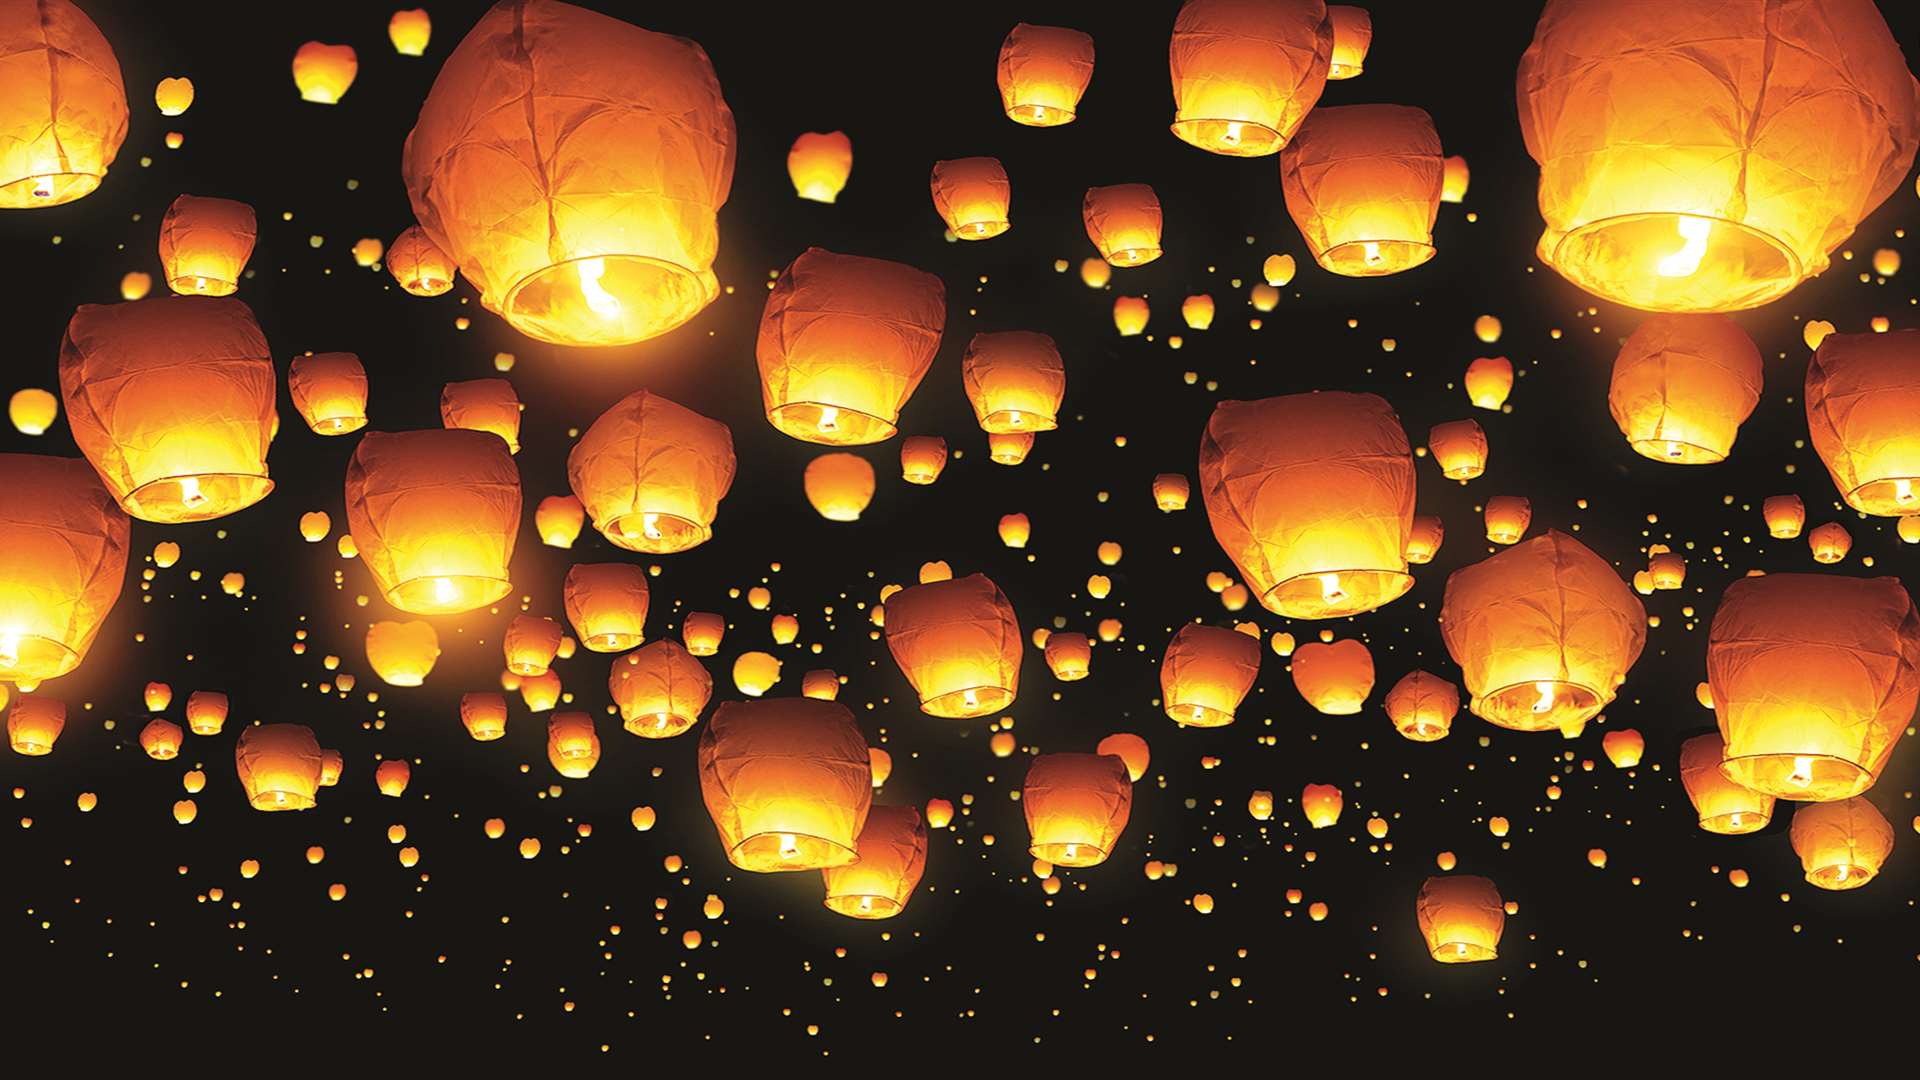 Sky lanterns have been banned from use in Swale